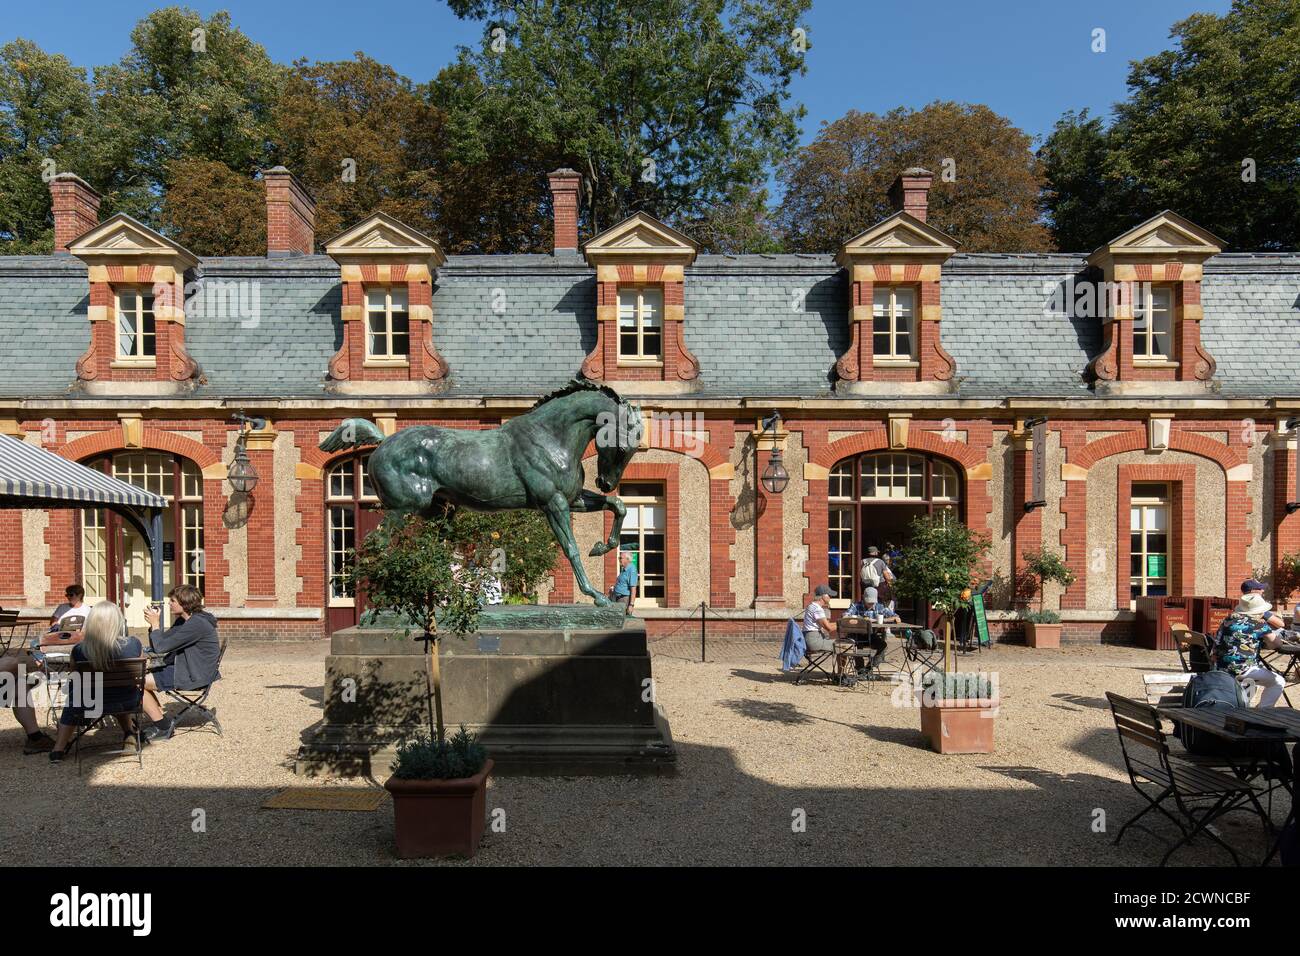 The stables at Waddesden Manor, Stock Photo